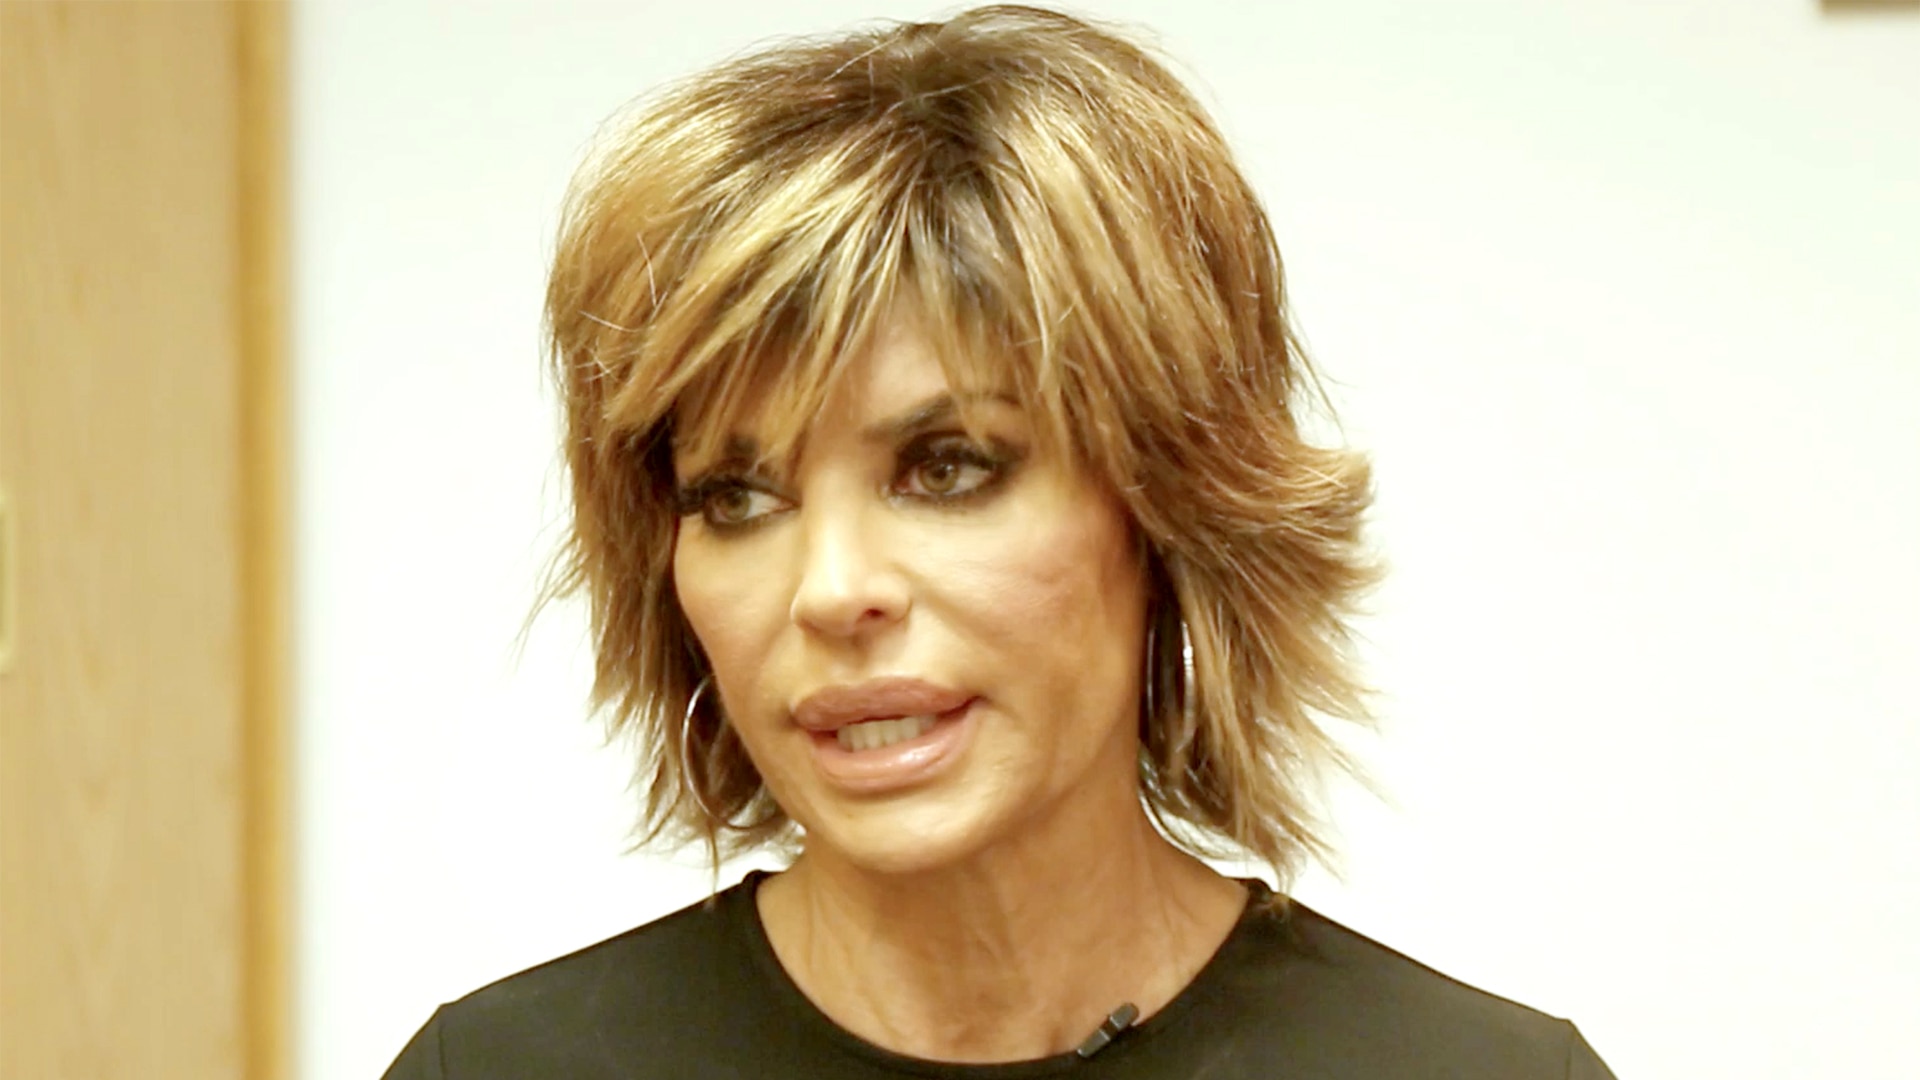 Pictures Gallery of lisa rinna hair cuts.